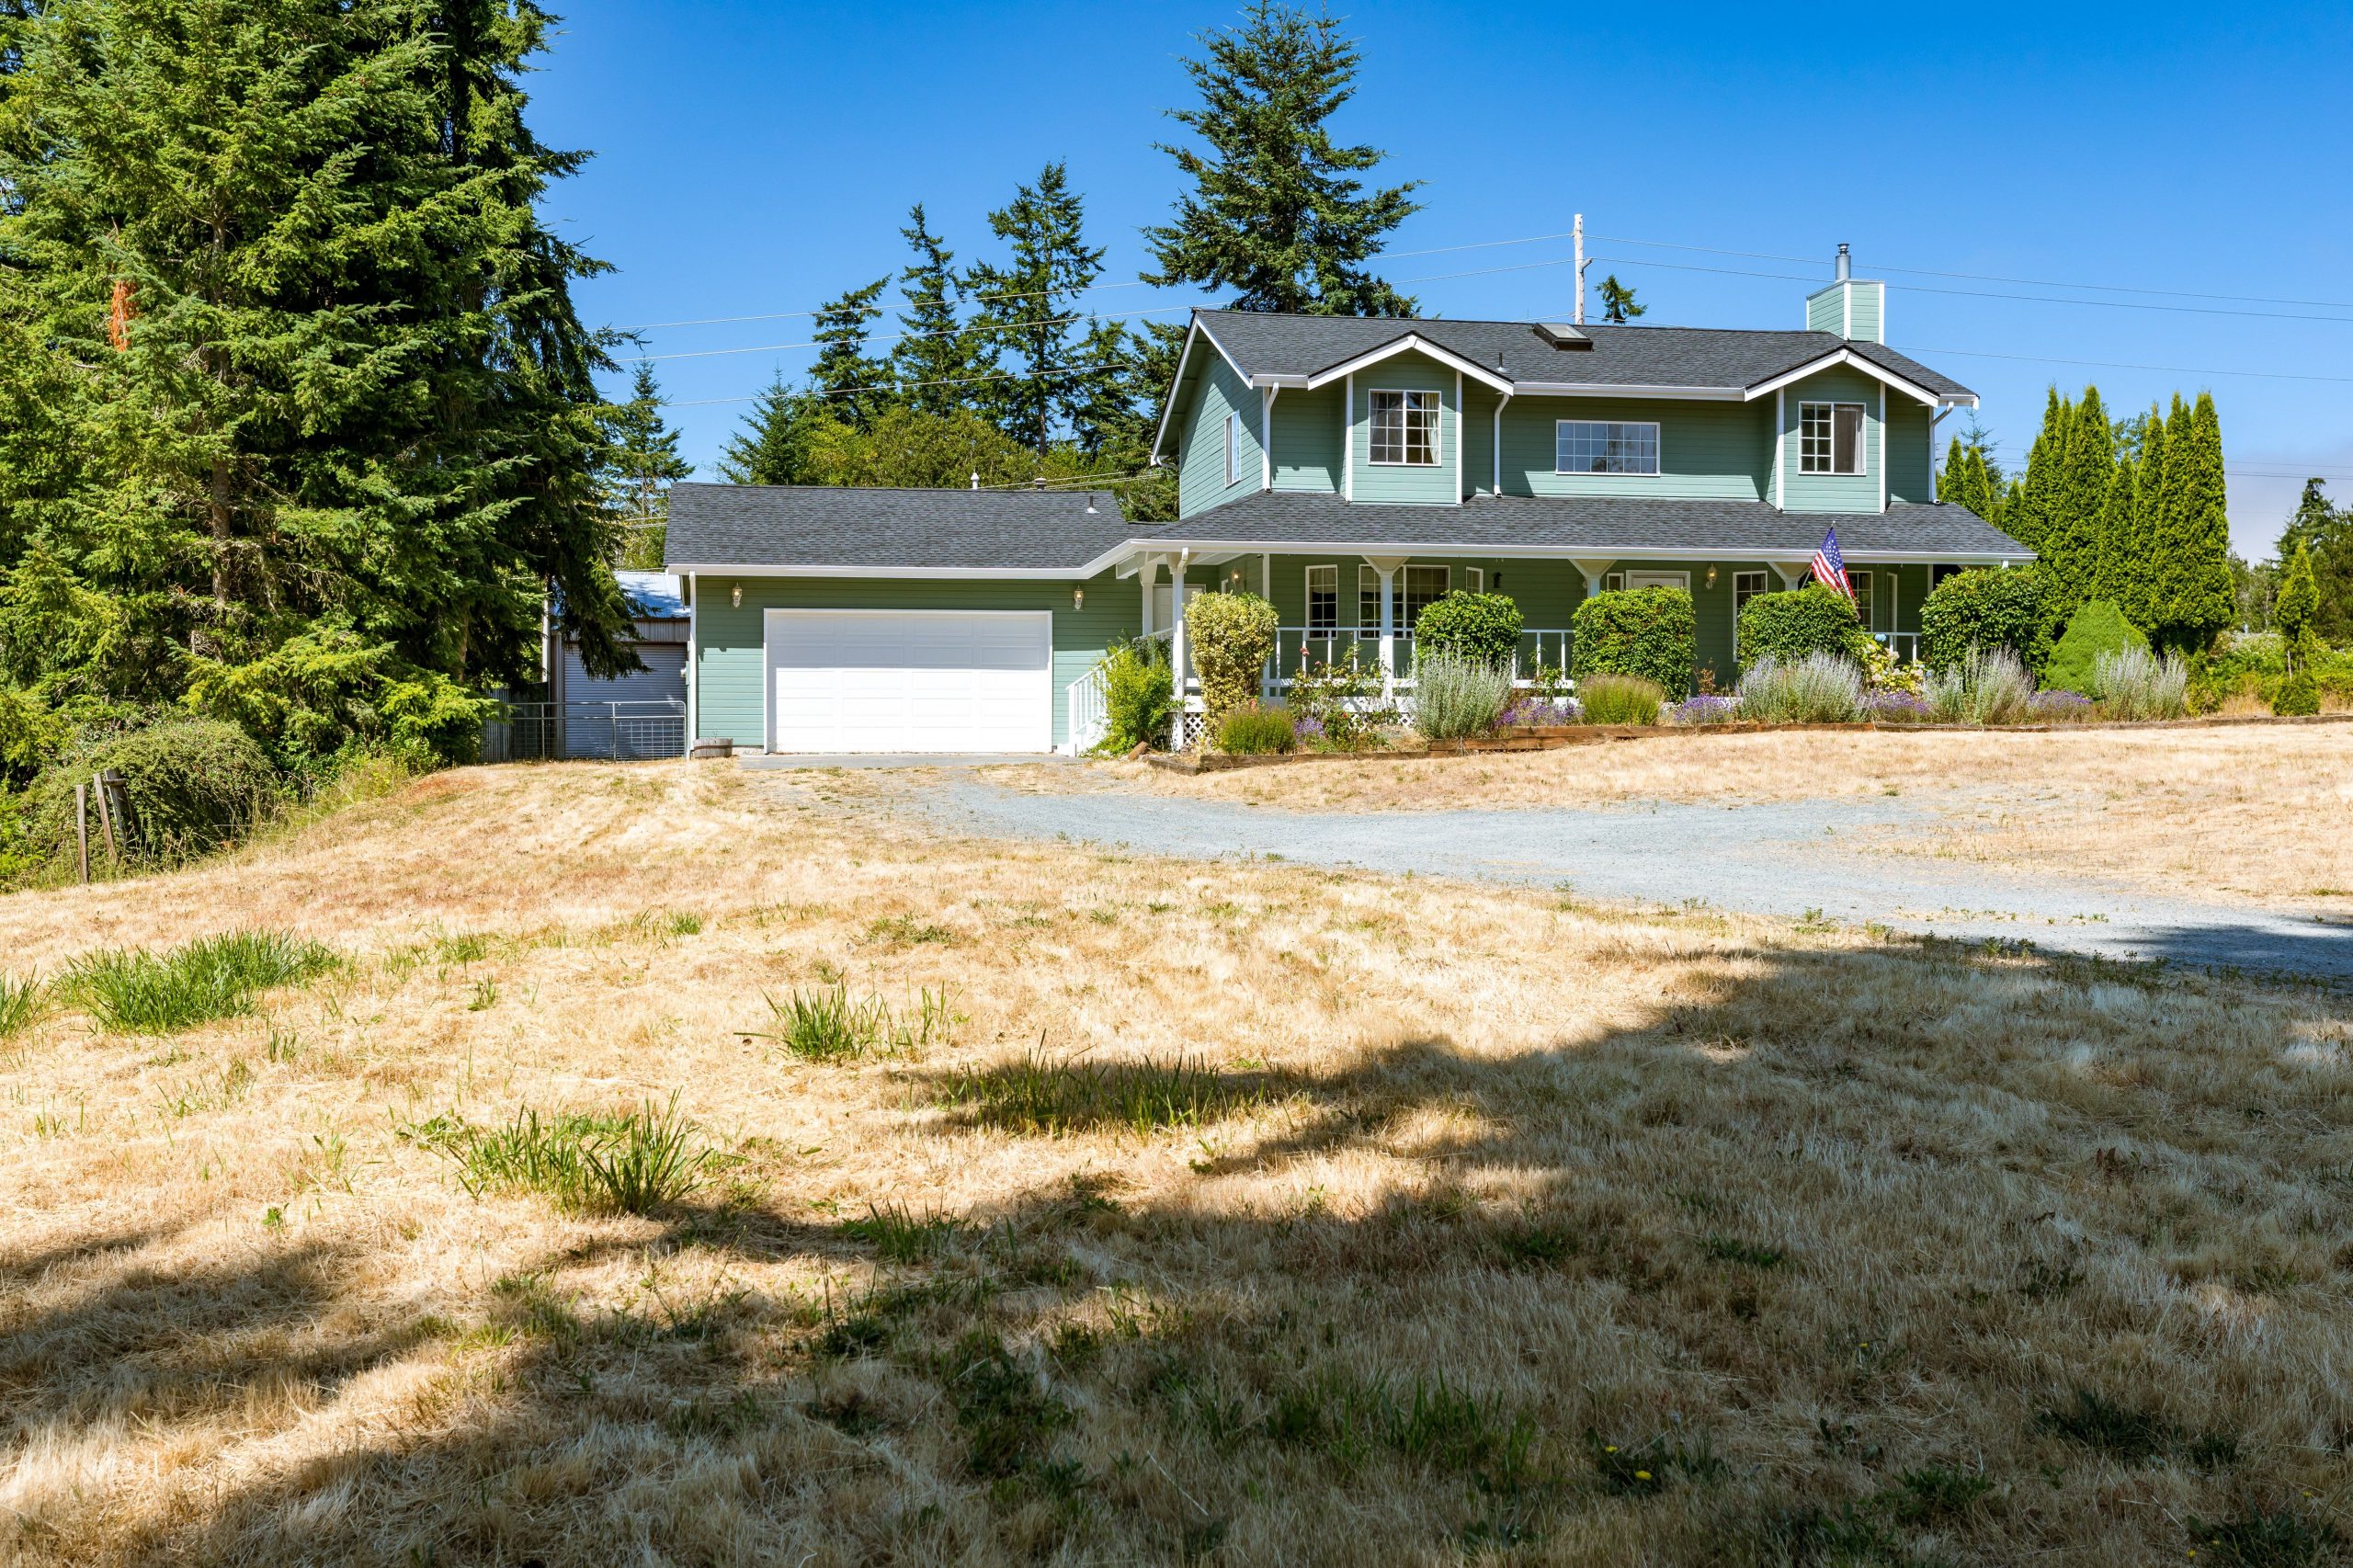 Home in Northgate Terrace, Whidbey Island, Washington, North Whidbey, Close to Base